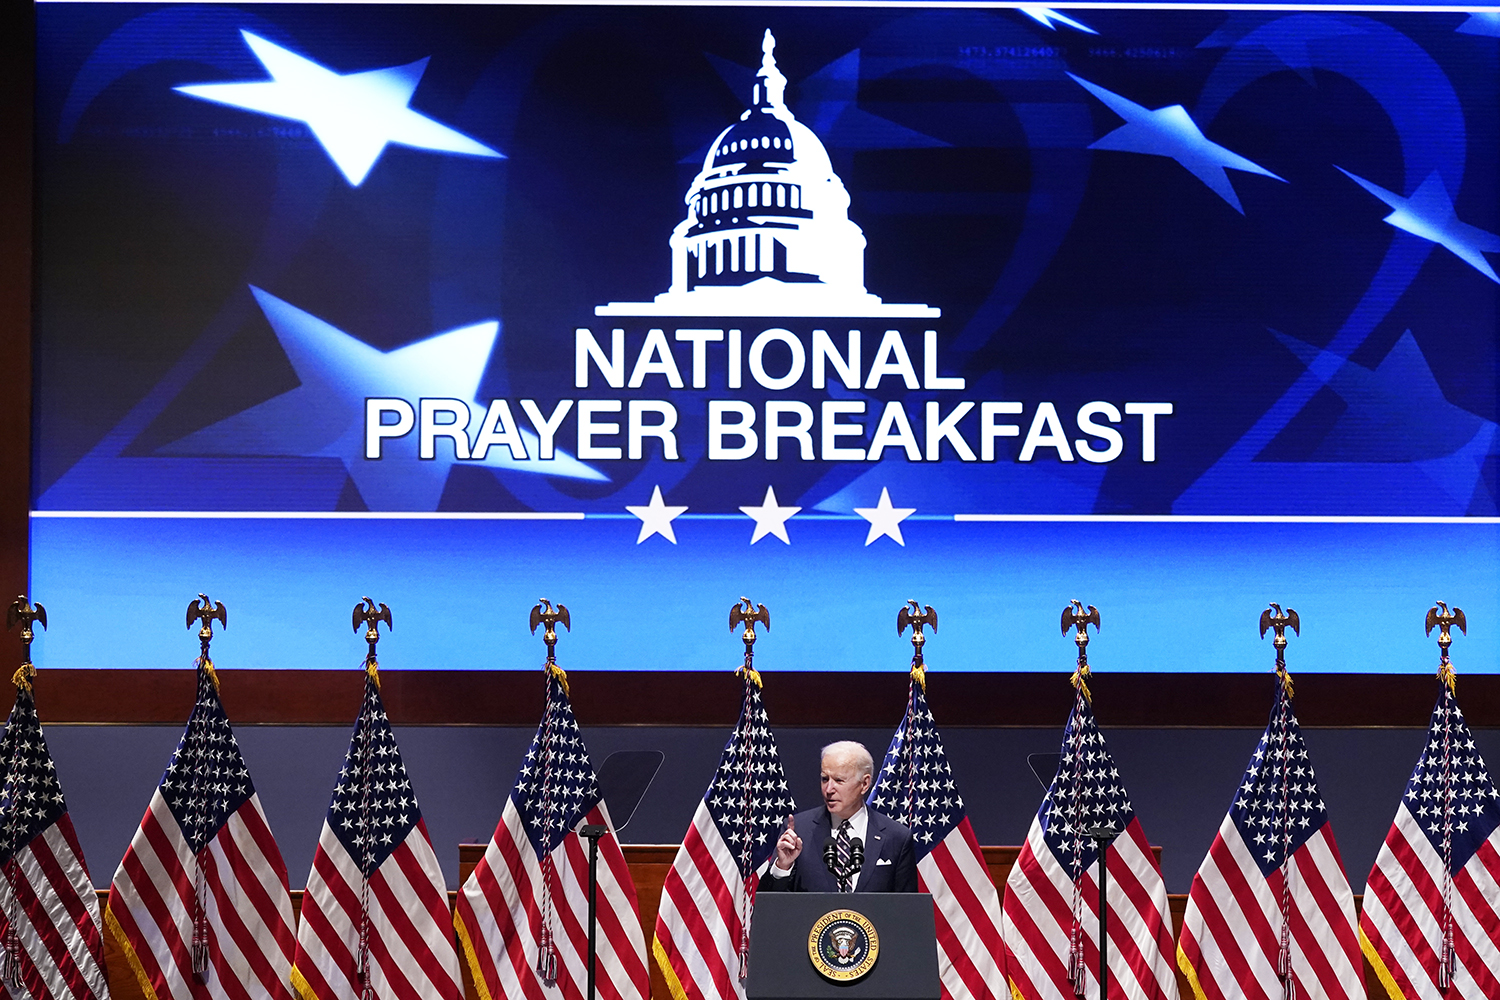 National Prayer Breakfast breaks from ‘The Family’ with new organization